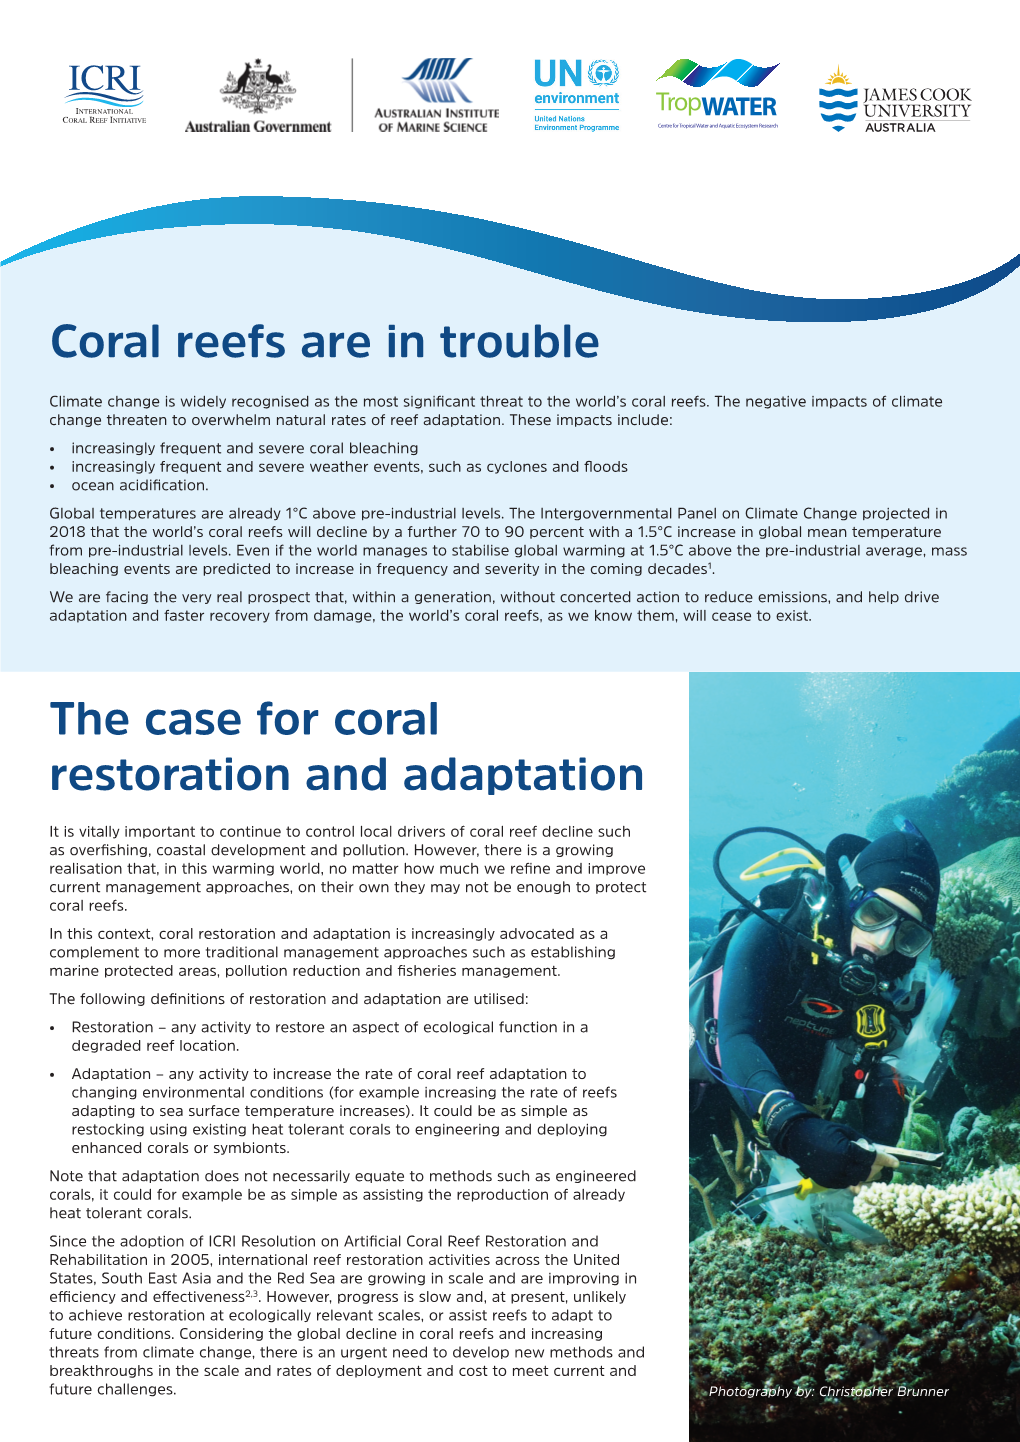 Coral Reefs Are in Trouble the Case for Coral Restoration and Adaptation